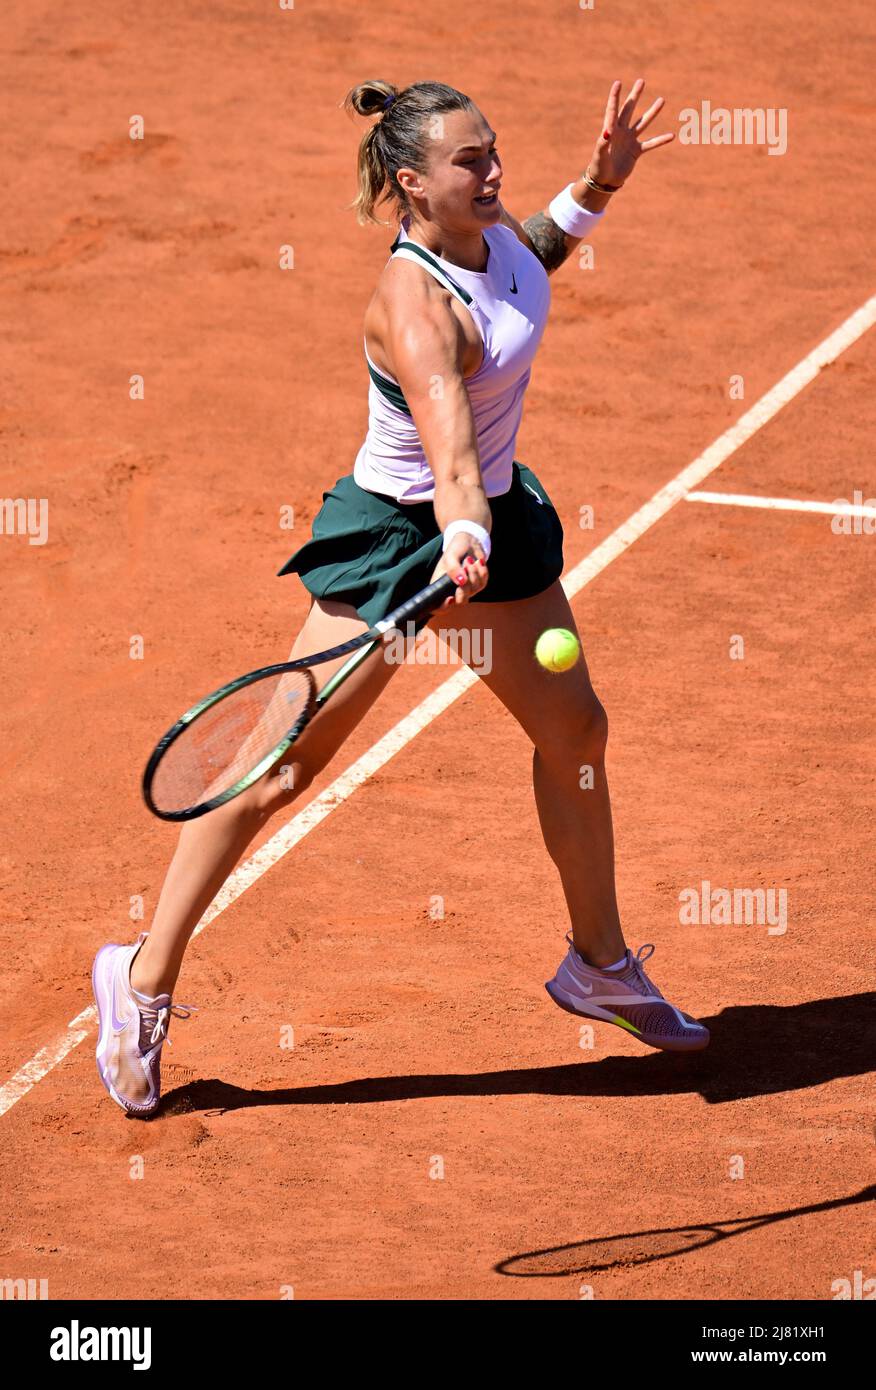 Tennis - WTA 1000 - Italian Open - Foro Italico, Rome, Italy - May 12, 2022  Belarus' Aryna Sabalenka in action during her second round match against  Jessica Pegula of the U.S. REUTERS/Alberto Lingria Stock Photo - Alamy